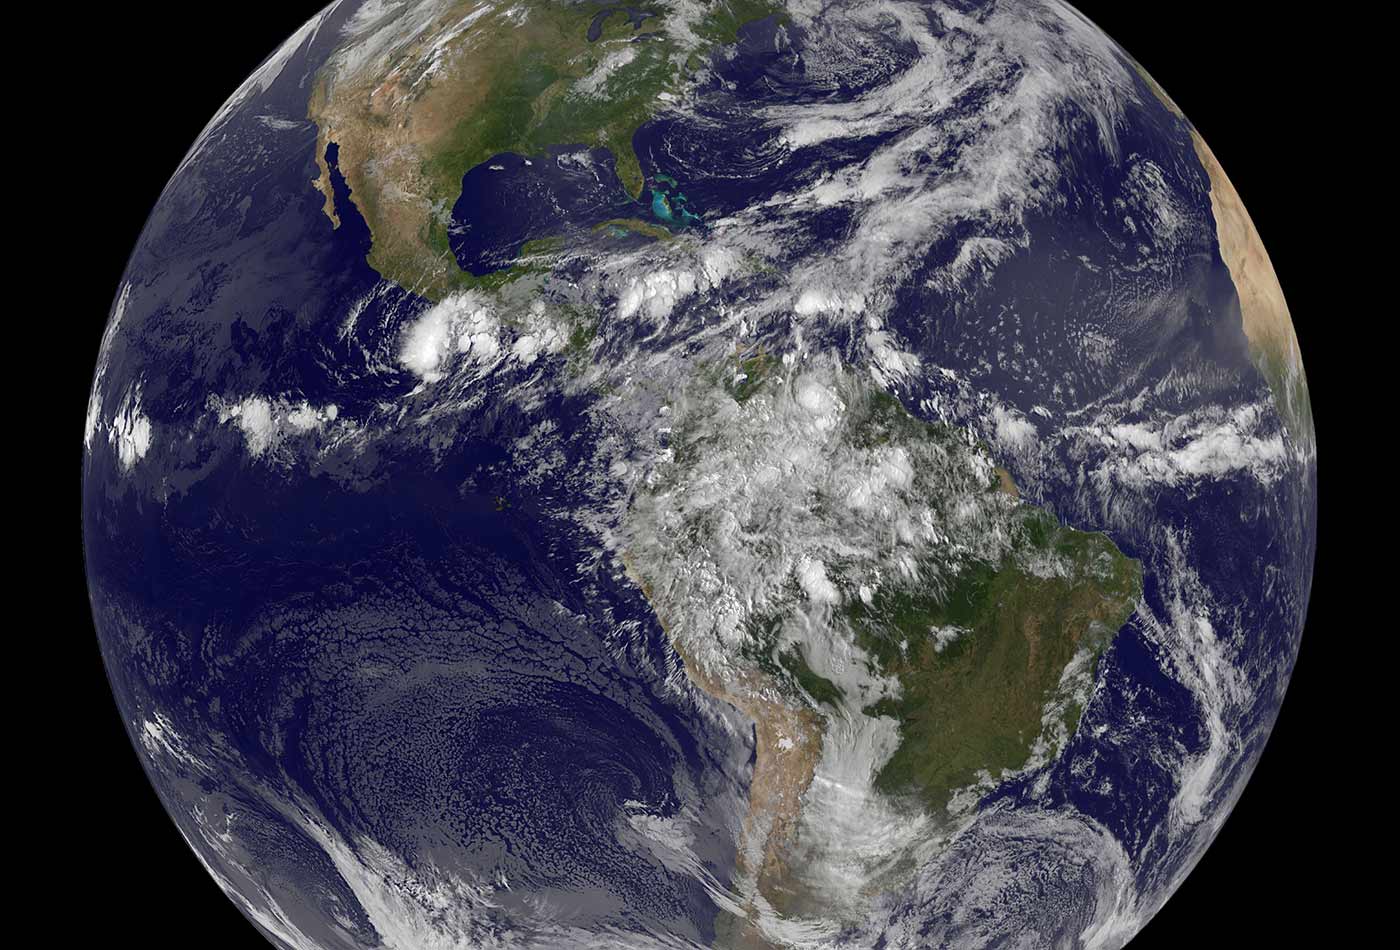 NASA GOES-13 Full Disk view of Earth.